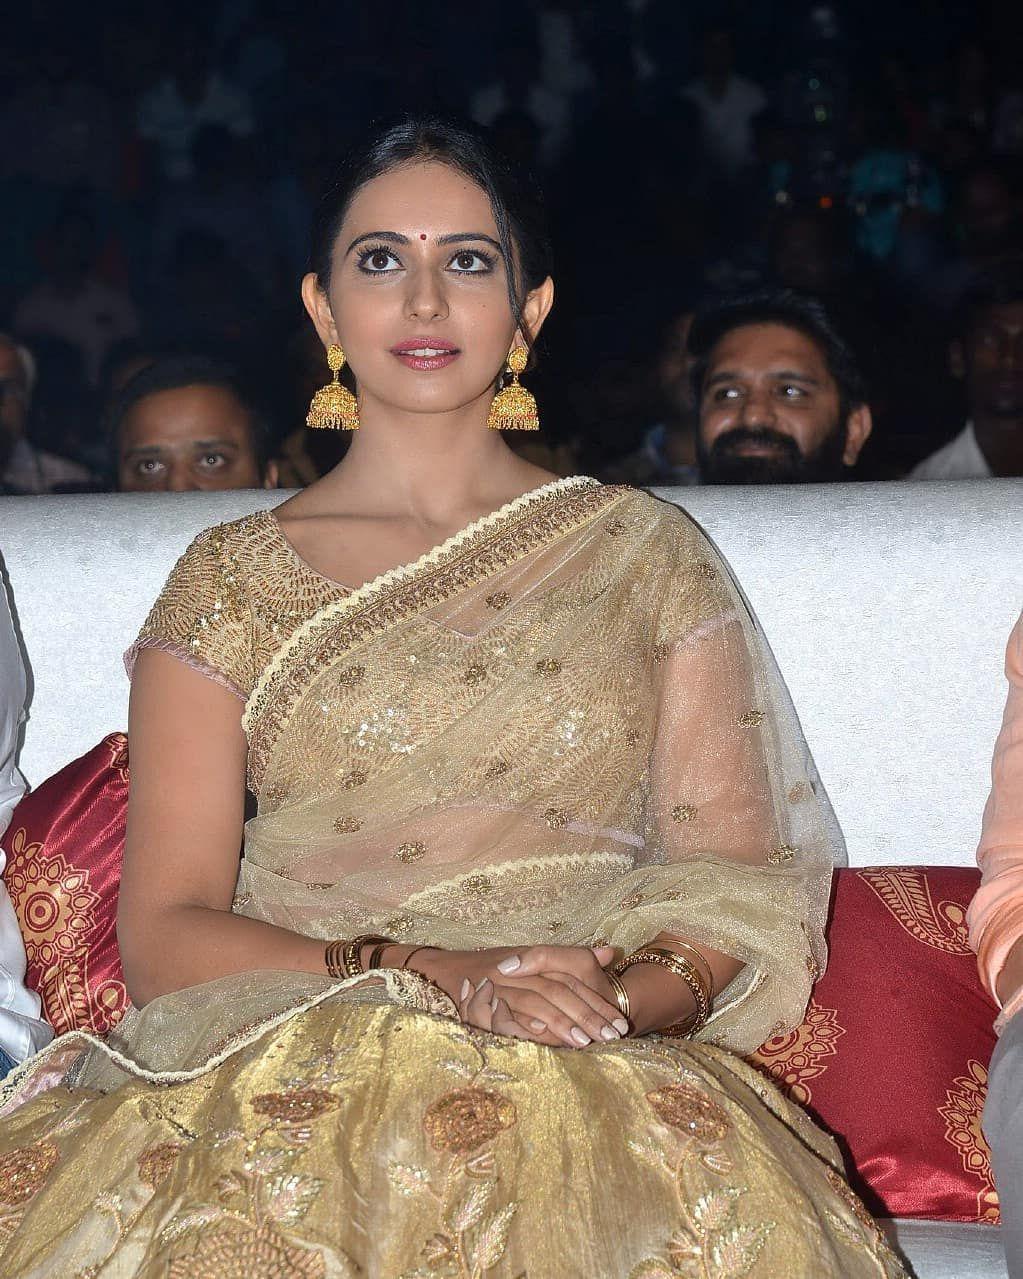 Rakul Preet spotted in Traditional attire at an event in Chennai